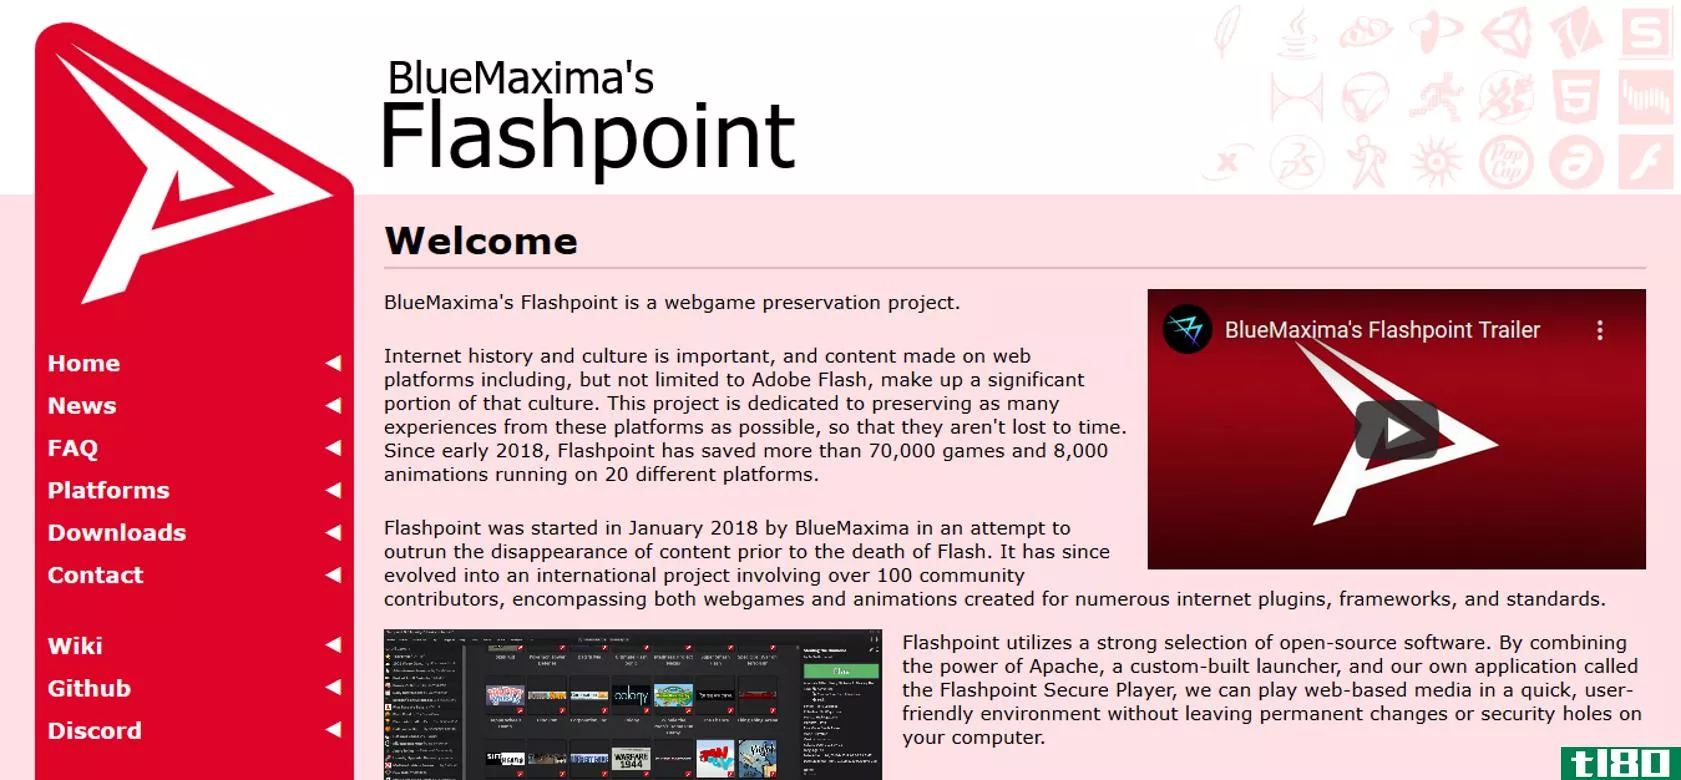 A screenshot of BlueMaxima's Flashpoint home page